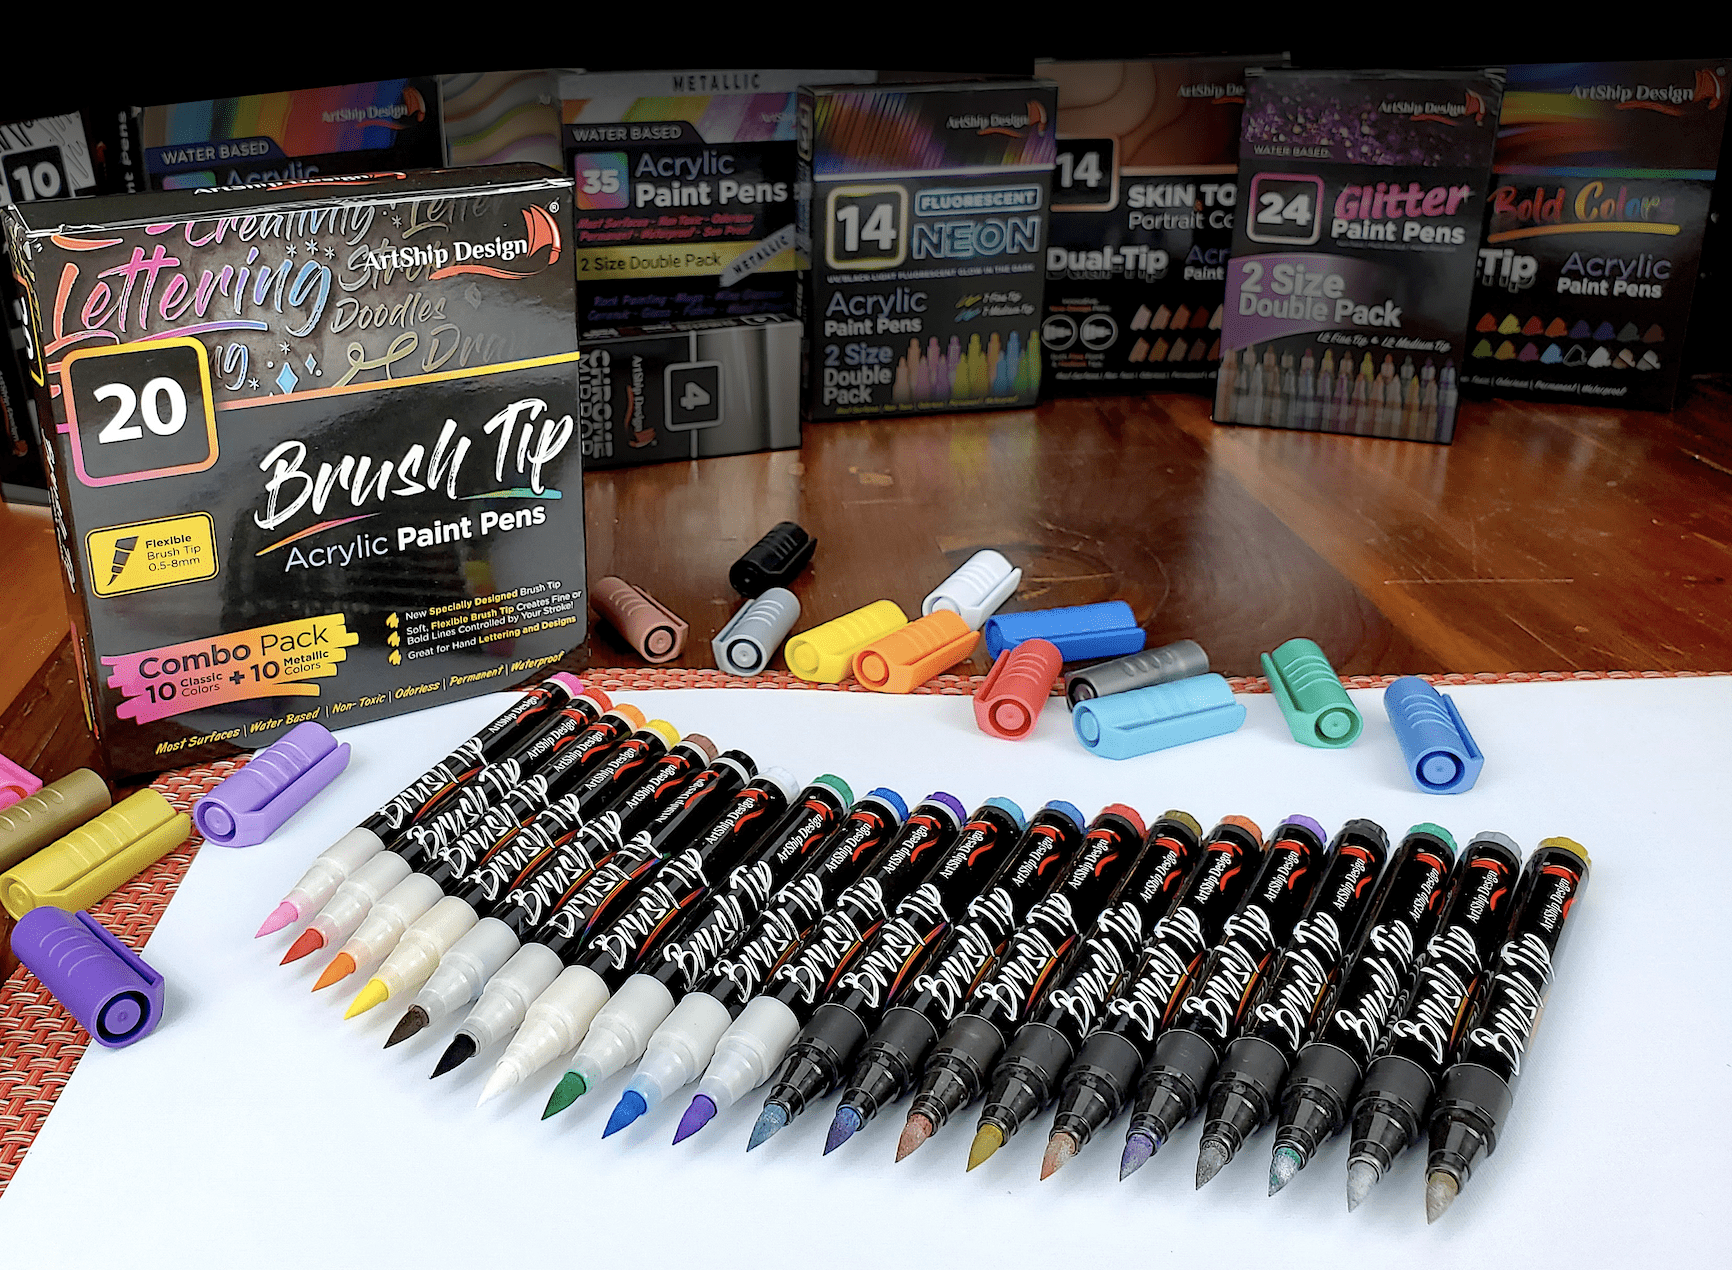 10 Black Acrylic Paint Pens, Double Pack of Both Extra Fine and